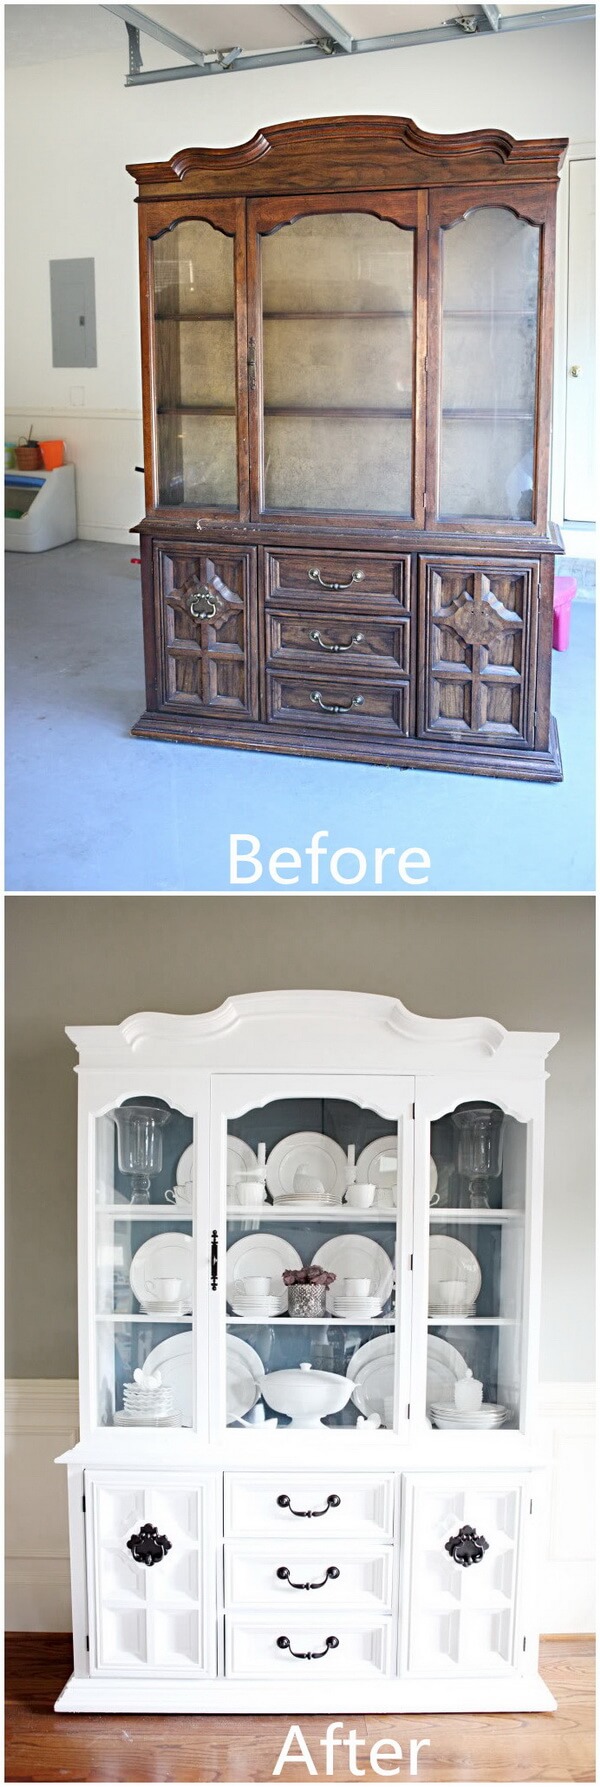 Give an Old China Closet a Coat of White Paint